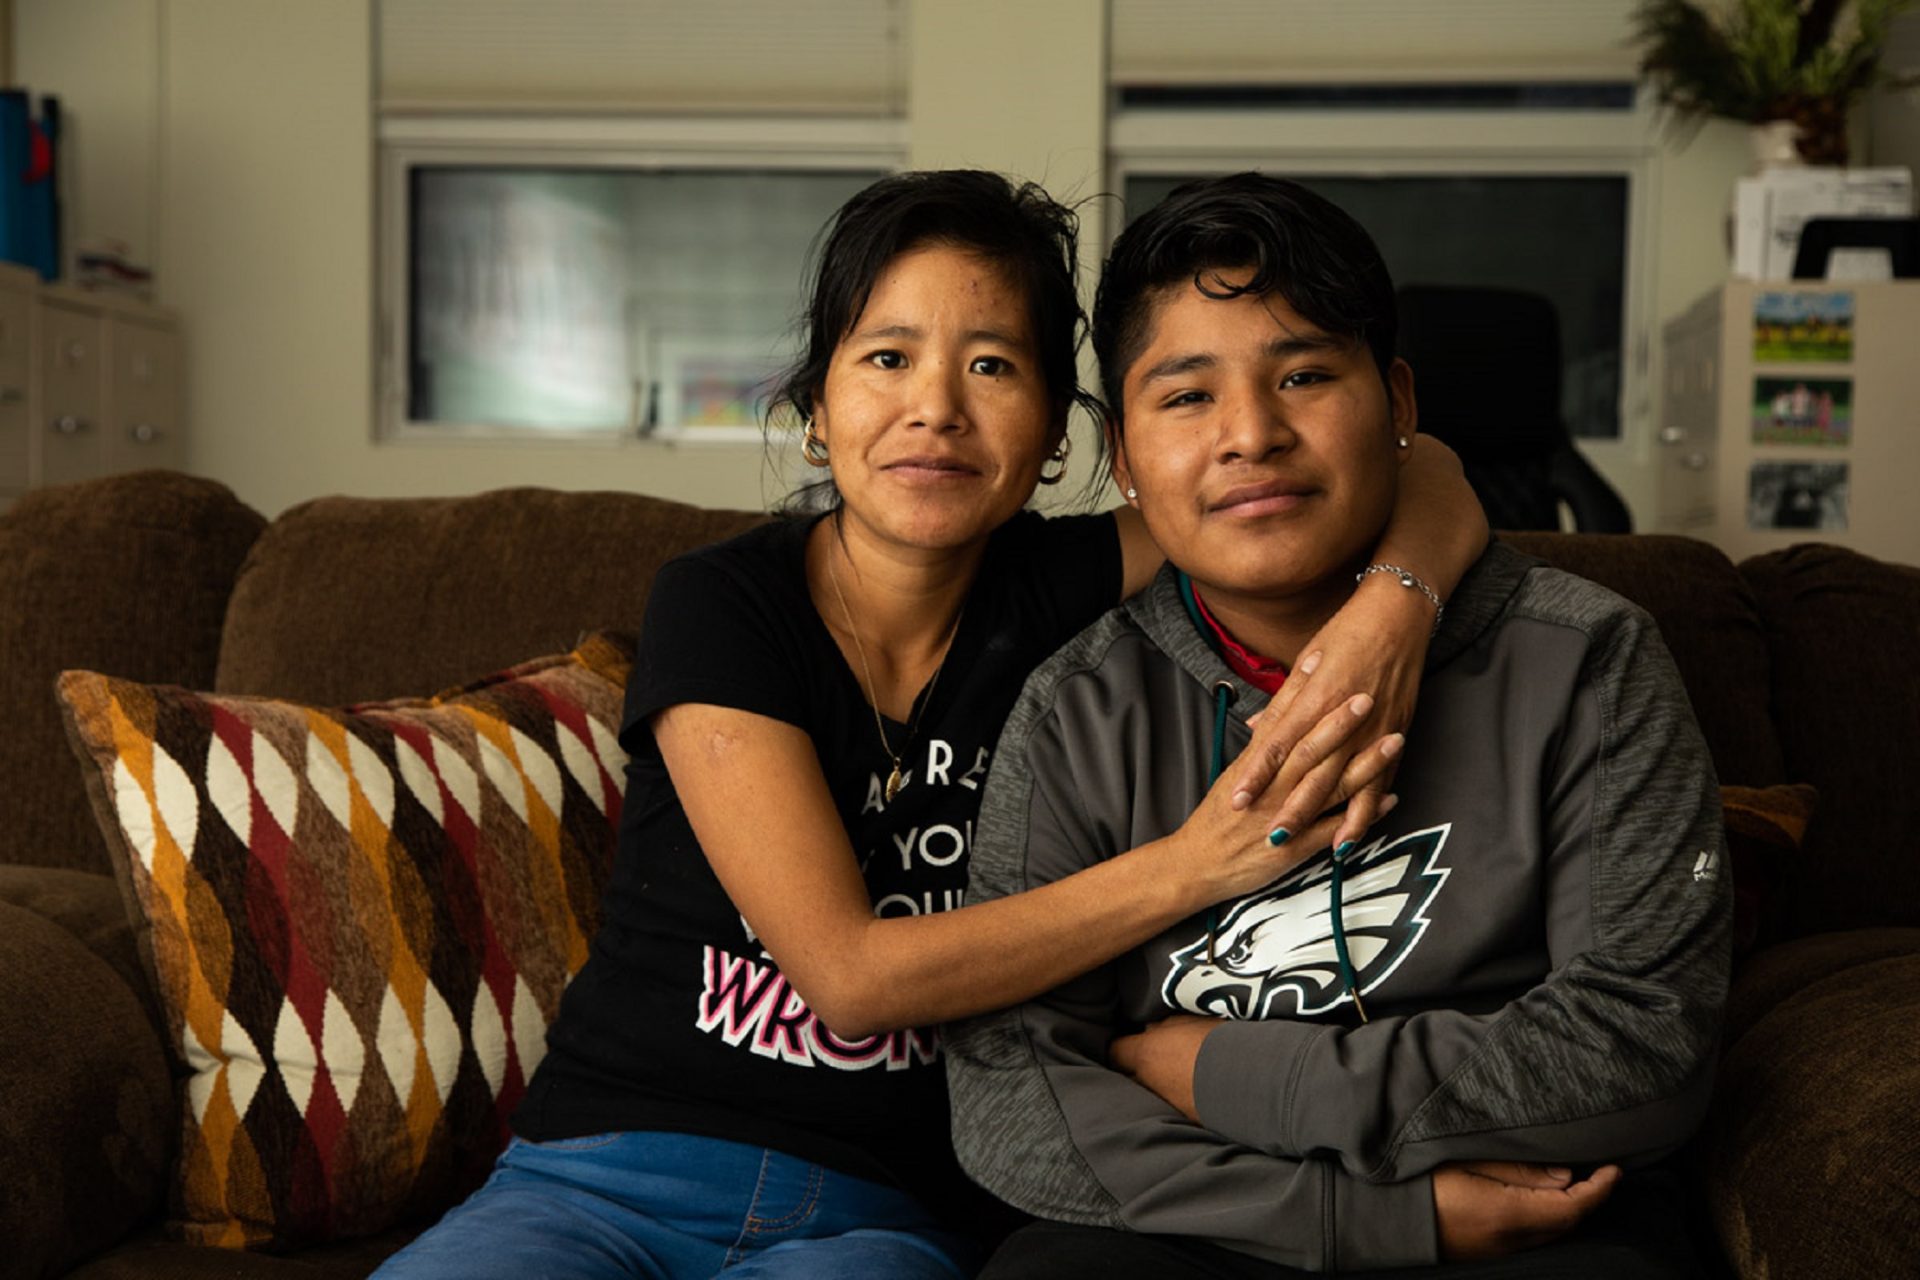 Margarita, Fredy and his two younger sisters traveled to Chambersburg from their home in western Guatemala in 2018, and later petitioned for asylum in the U.S.